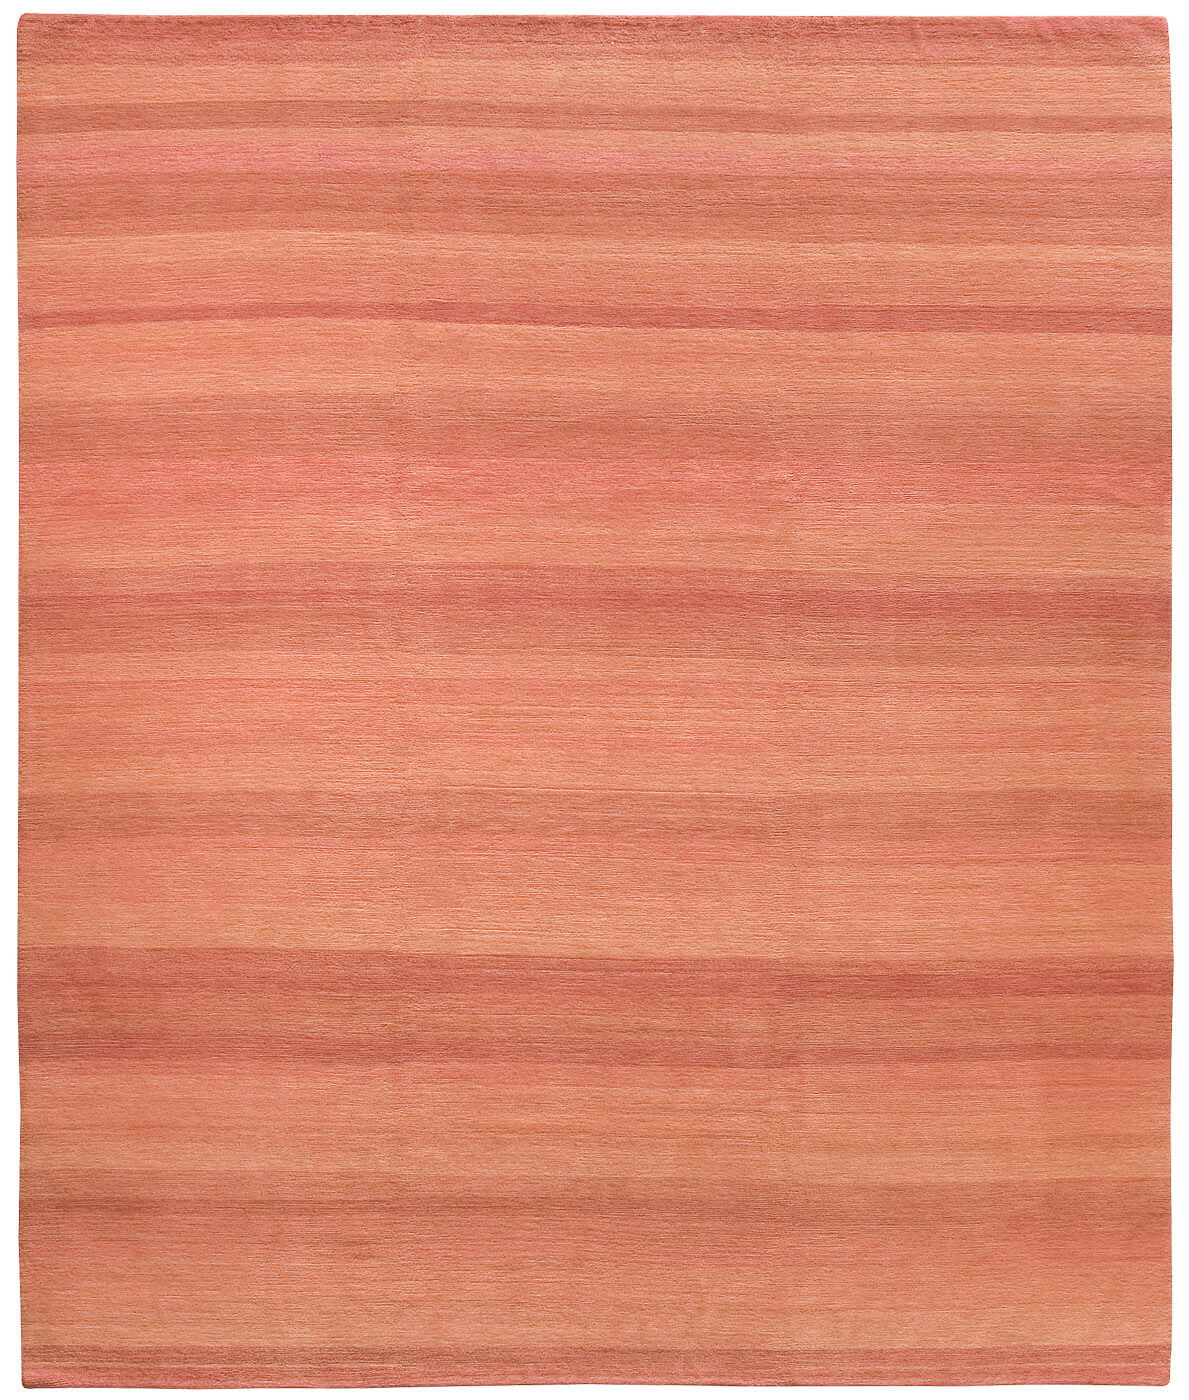 Hand-woven Pink Stripes Luxury Rug ☞ Size: 300 x 400 cm